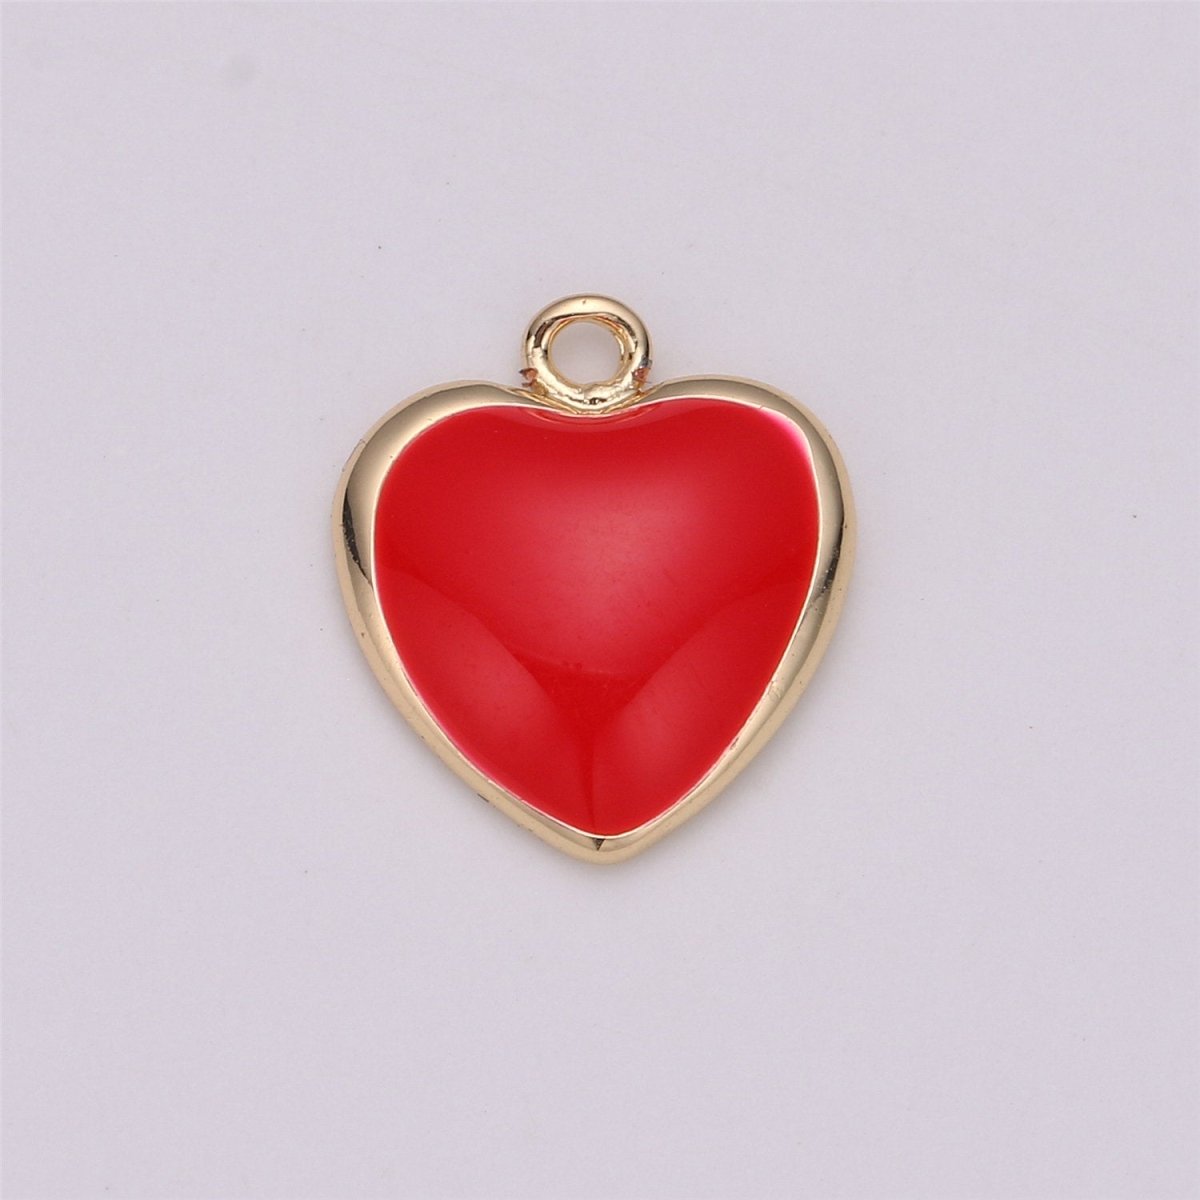 Tiny Enamel Heart Charms Little Color Hearts on Gold Filled Red Pink White Teal First Love Earing Bracelet Necklace Jewelry Supplies, C-524 - DLUXCA